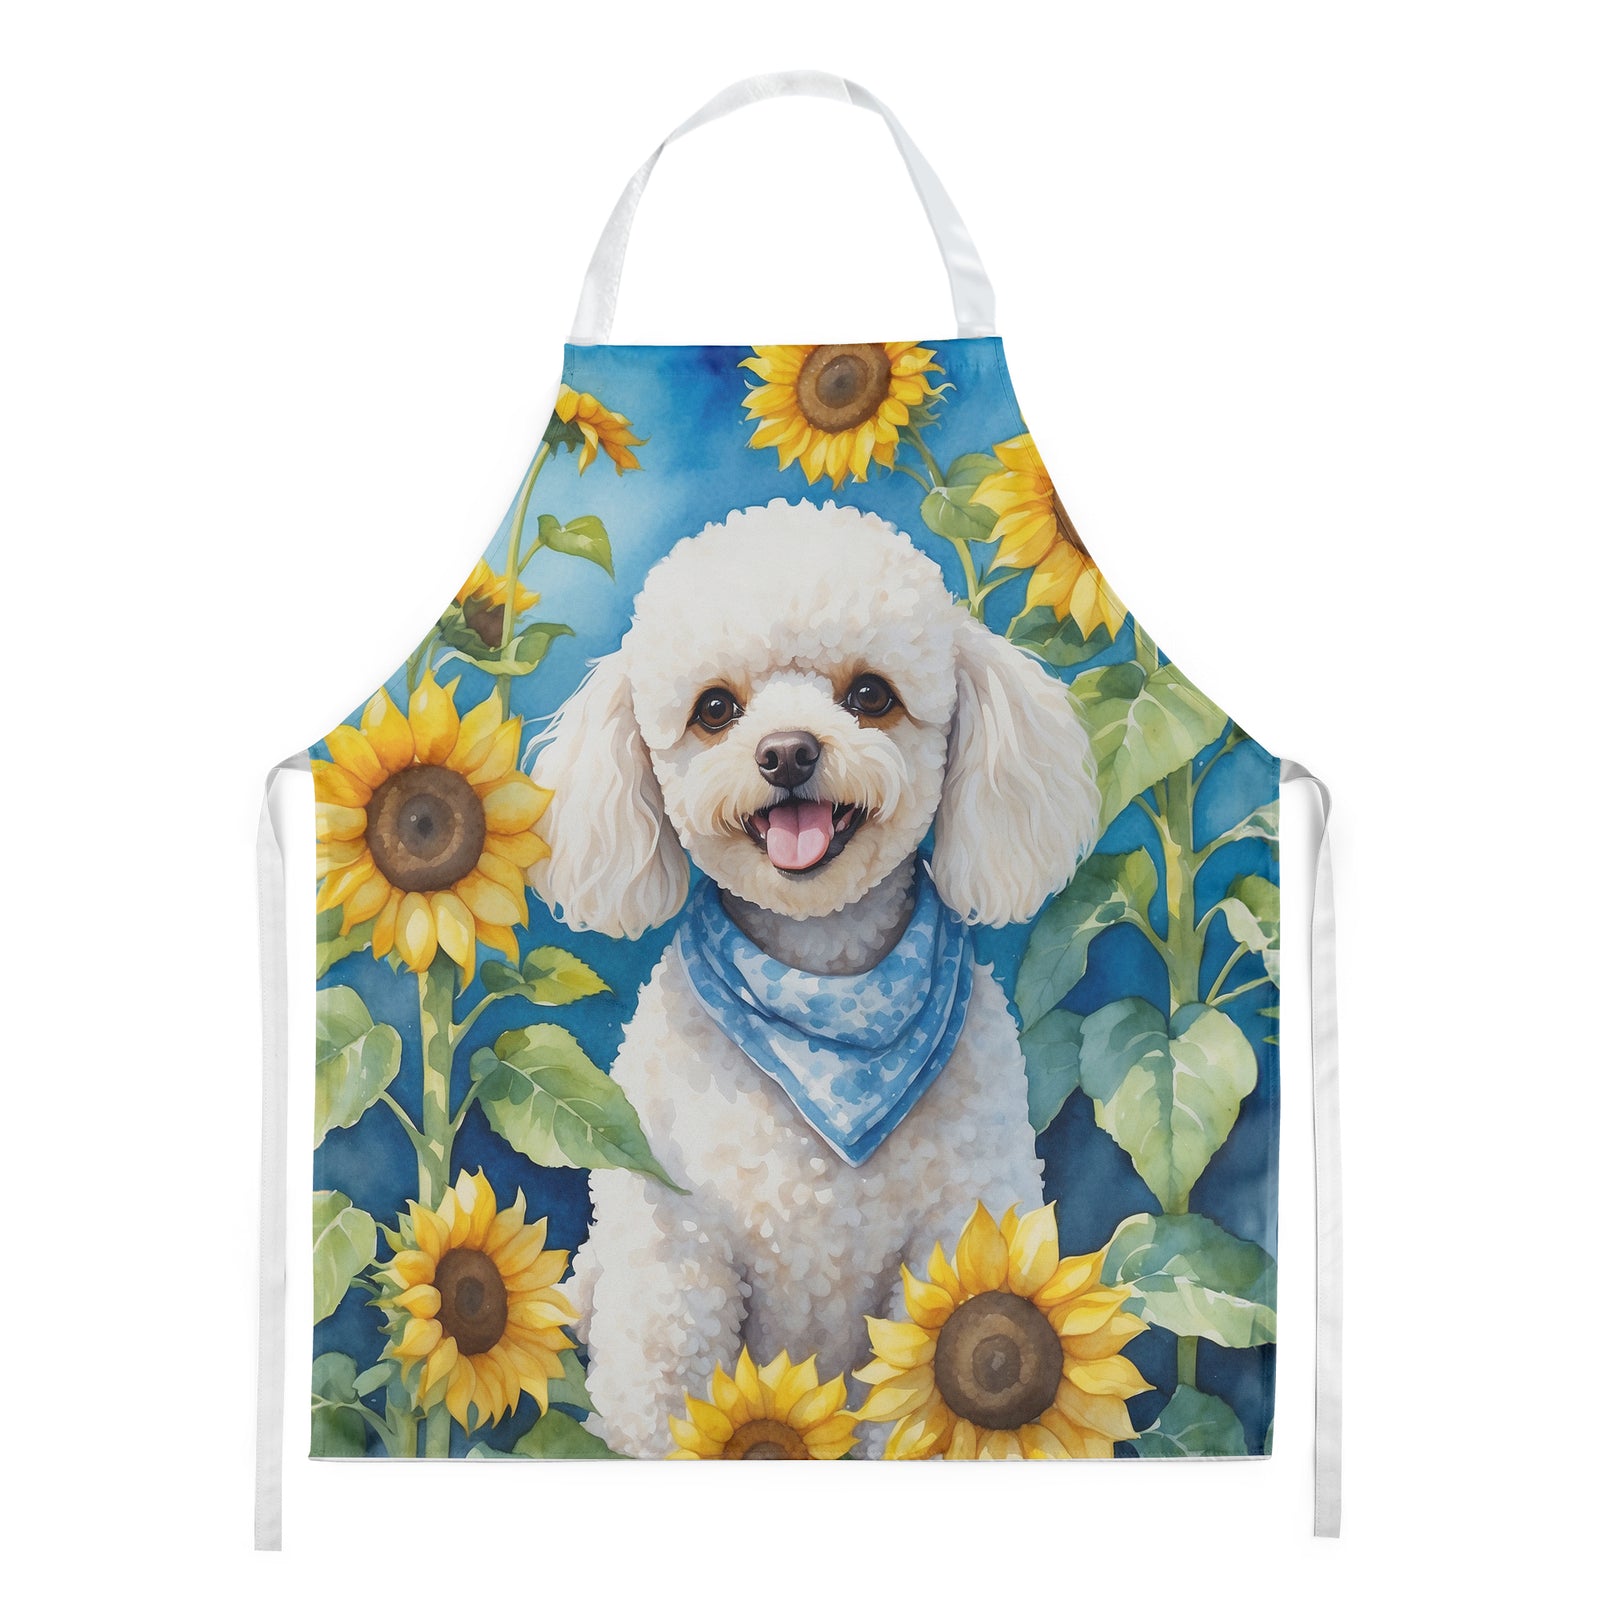 Buy this White Poodle in Sunflowers Apron